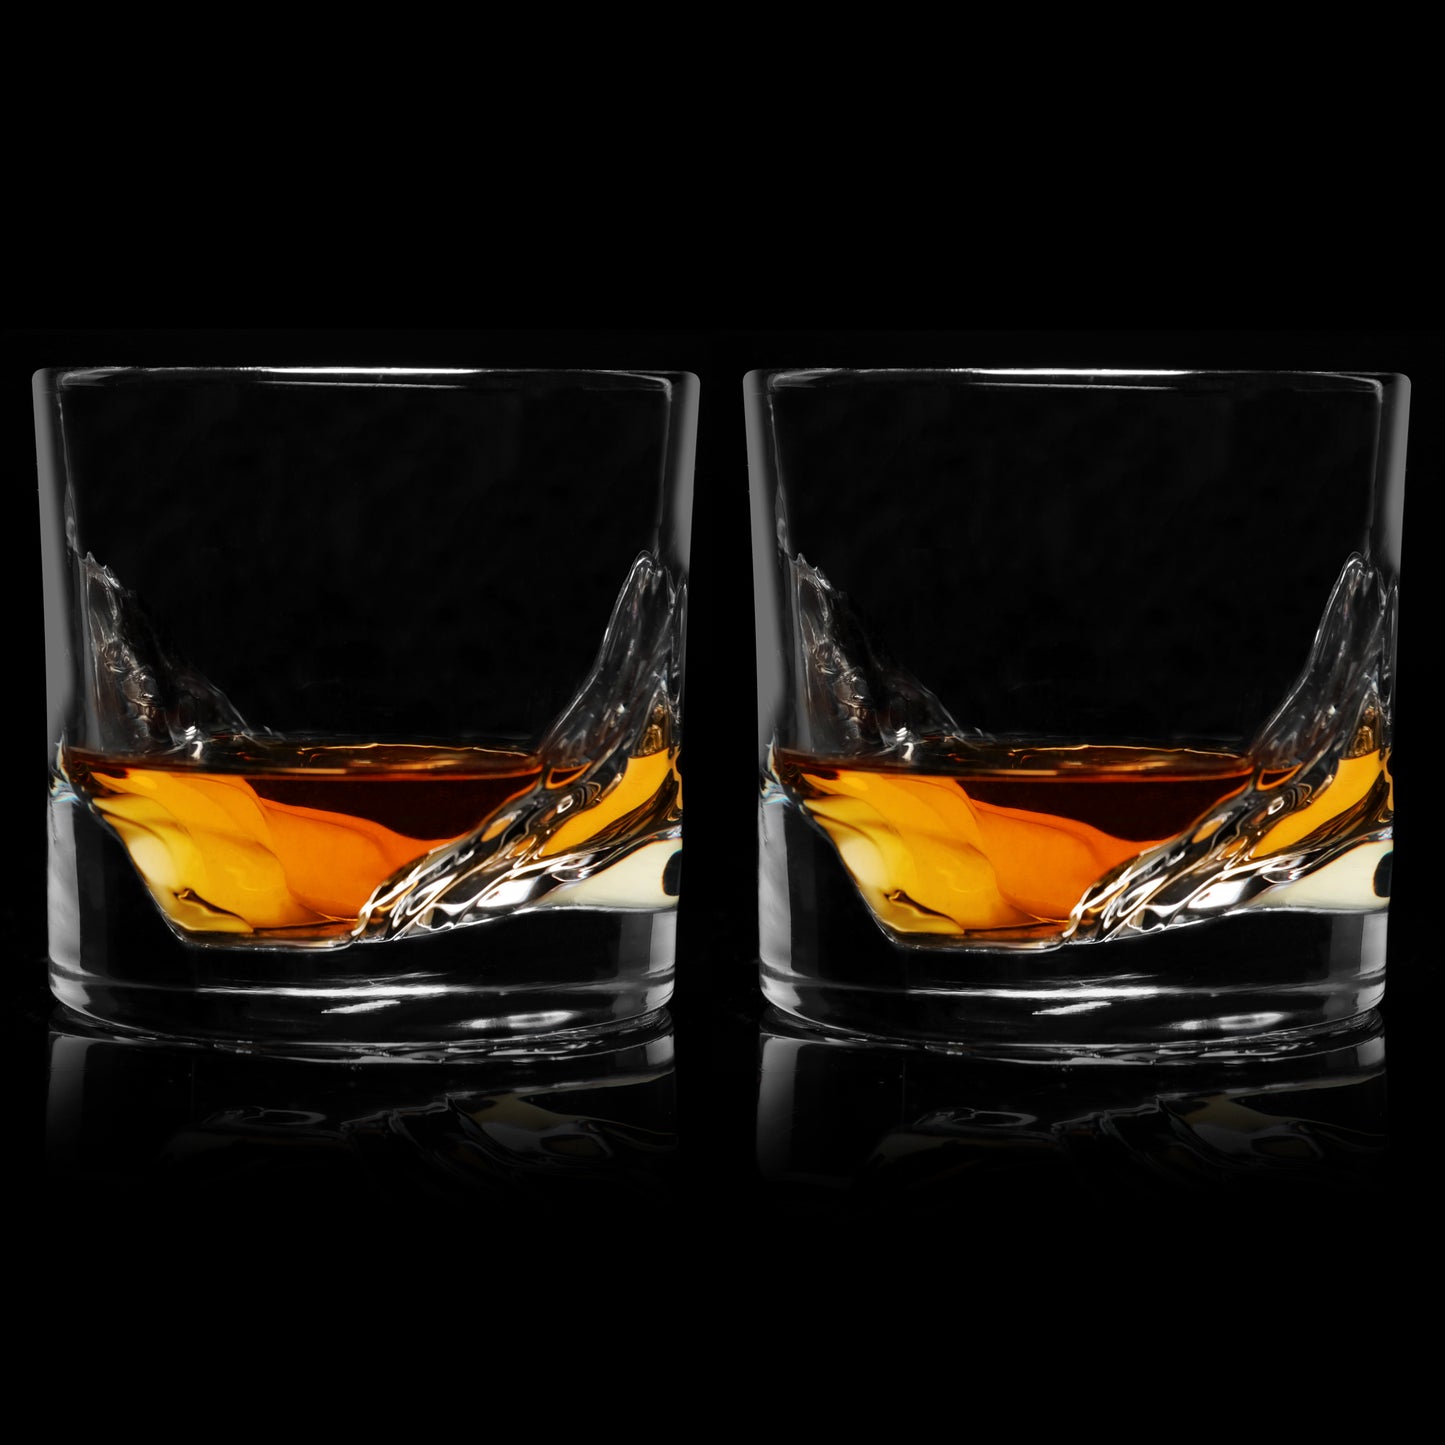 Liiton Grand Canyon Whiskey Glass Set of 4 Heavy Whisky Tumbler Best as Old  for sale online